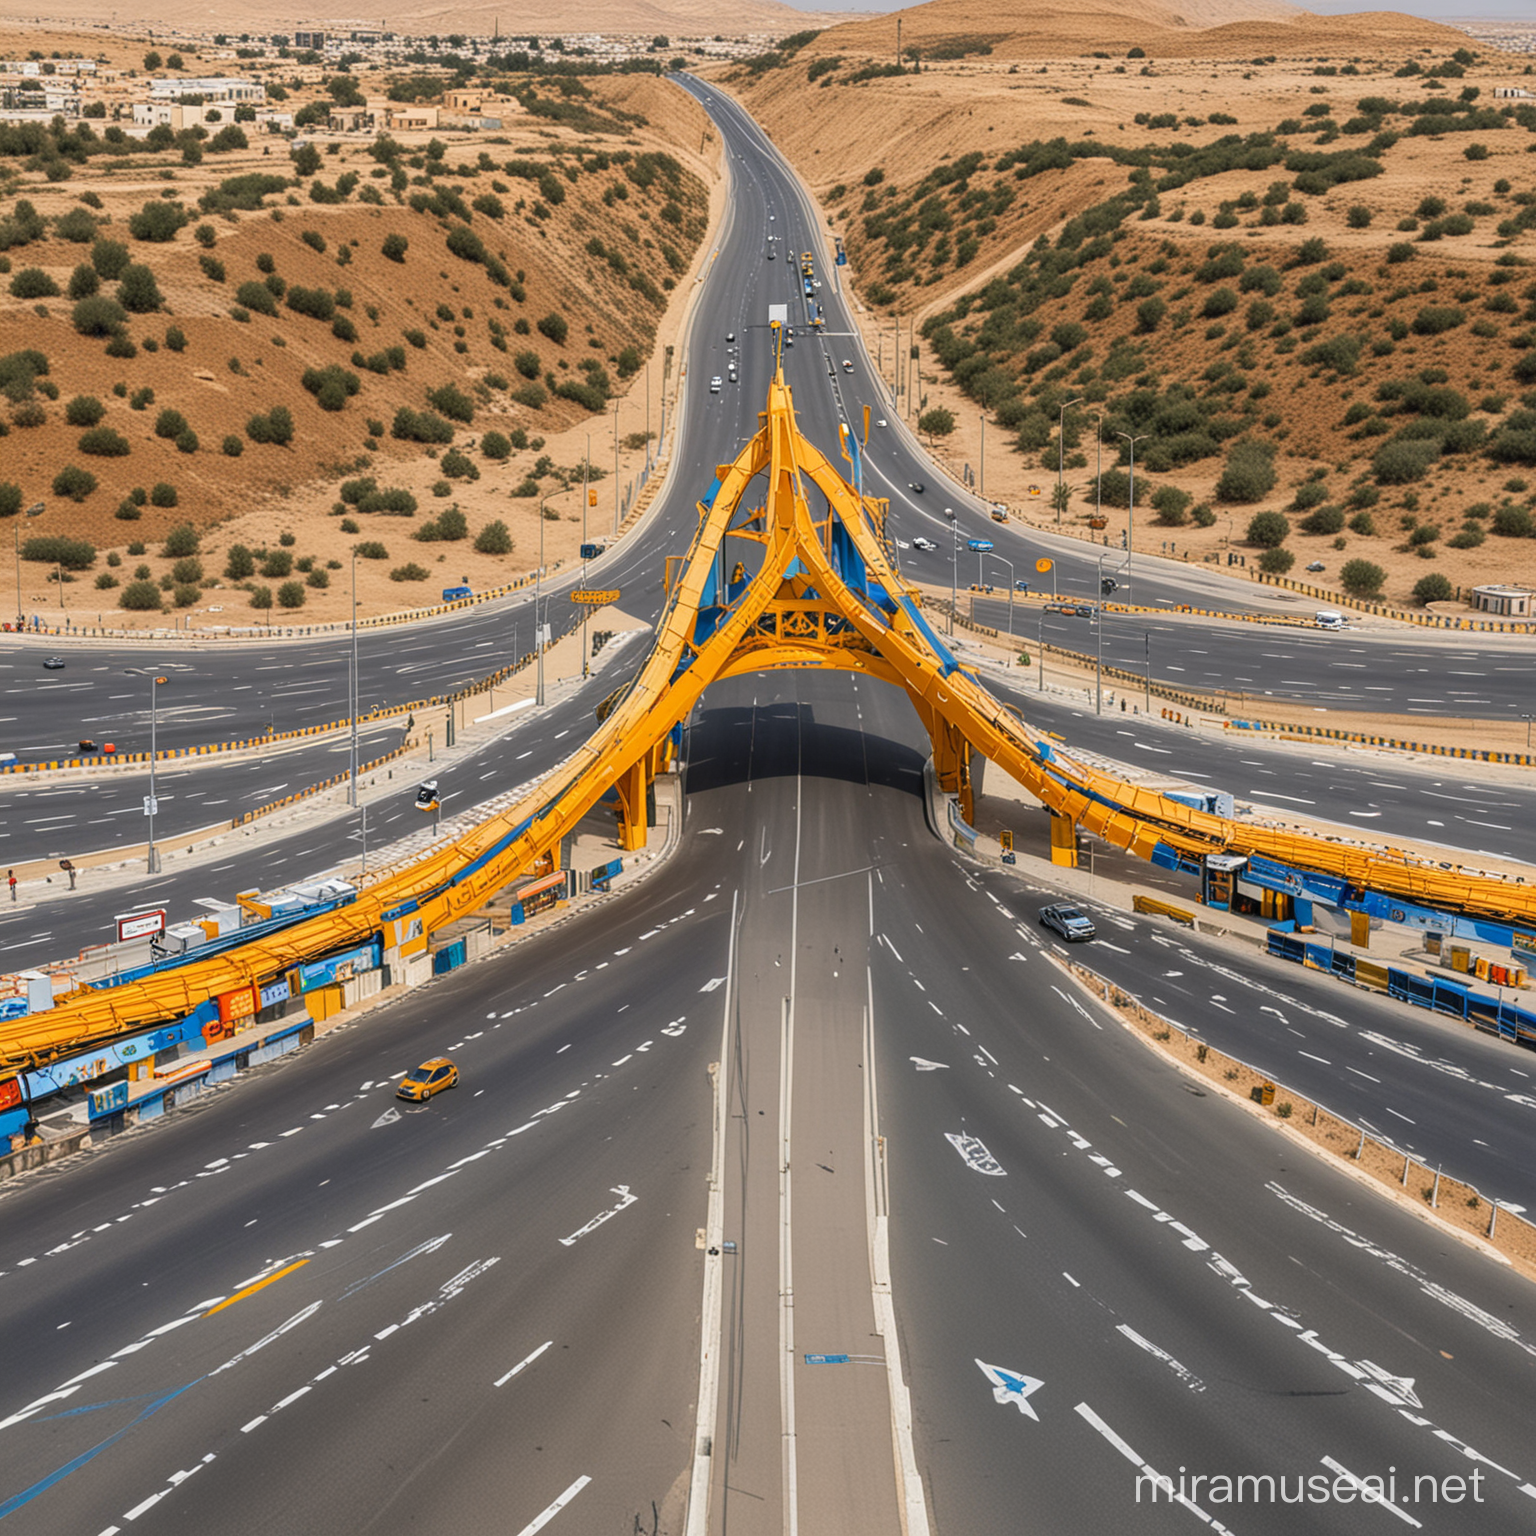 Colorful GearShaped Toll Gates for Qalyubia Governorate